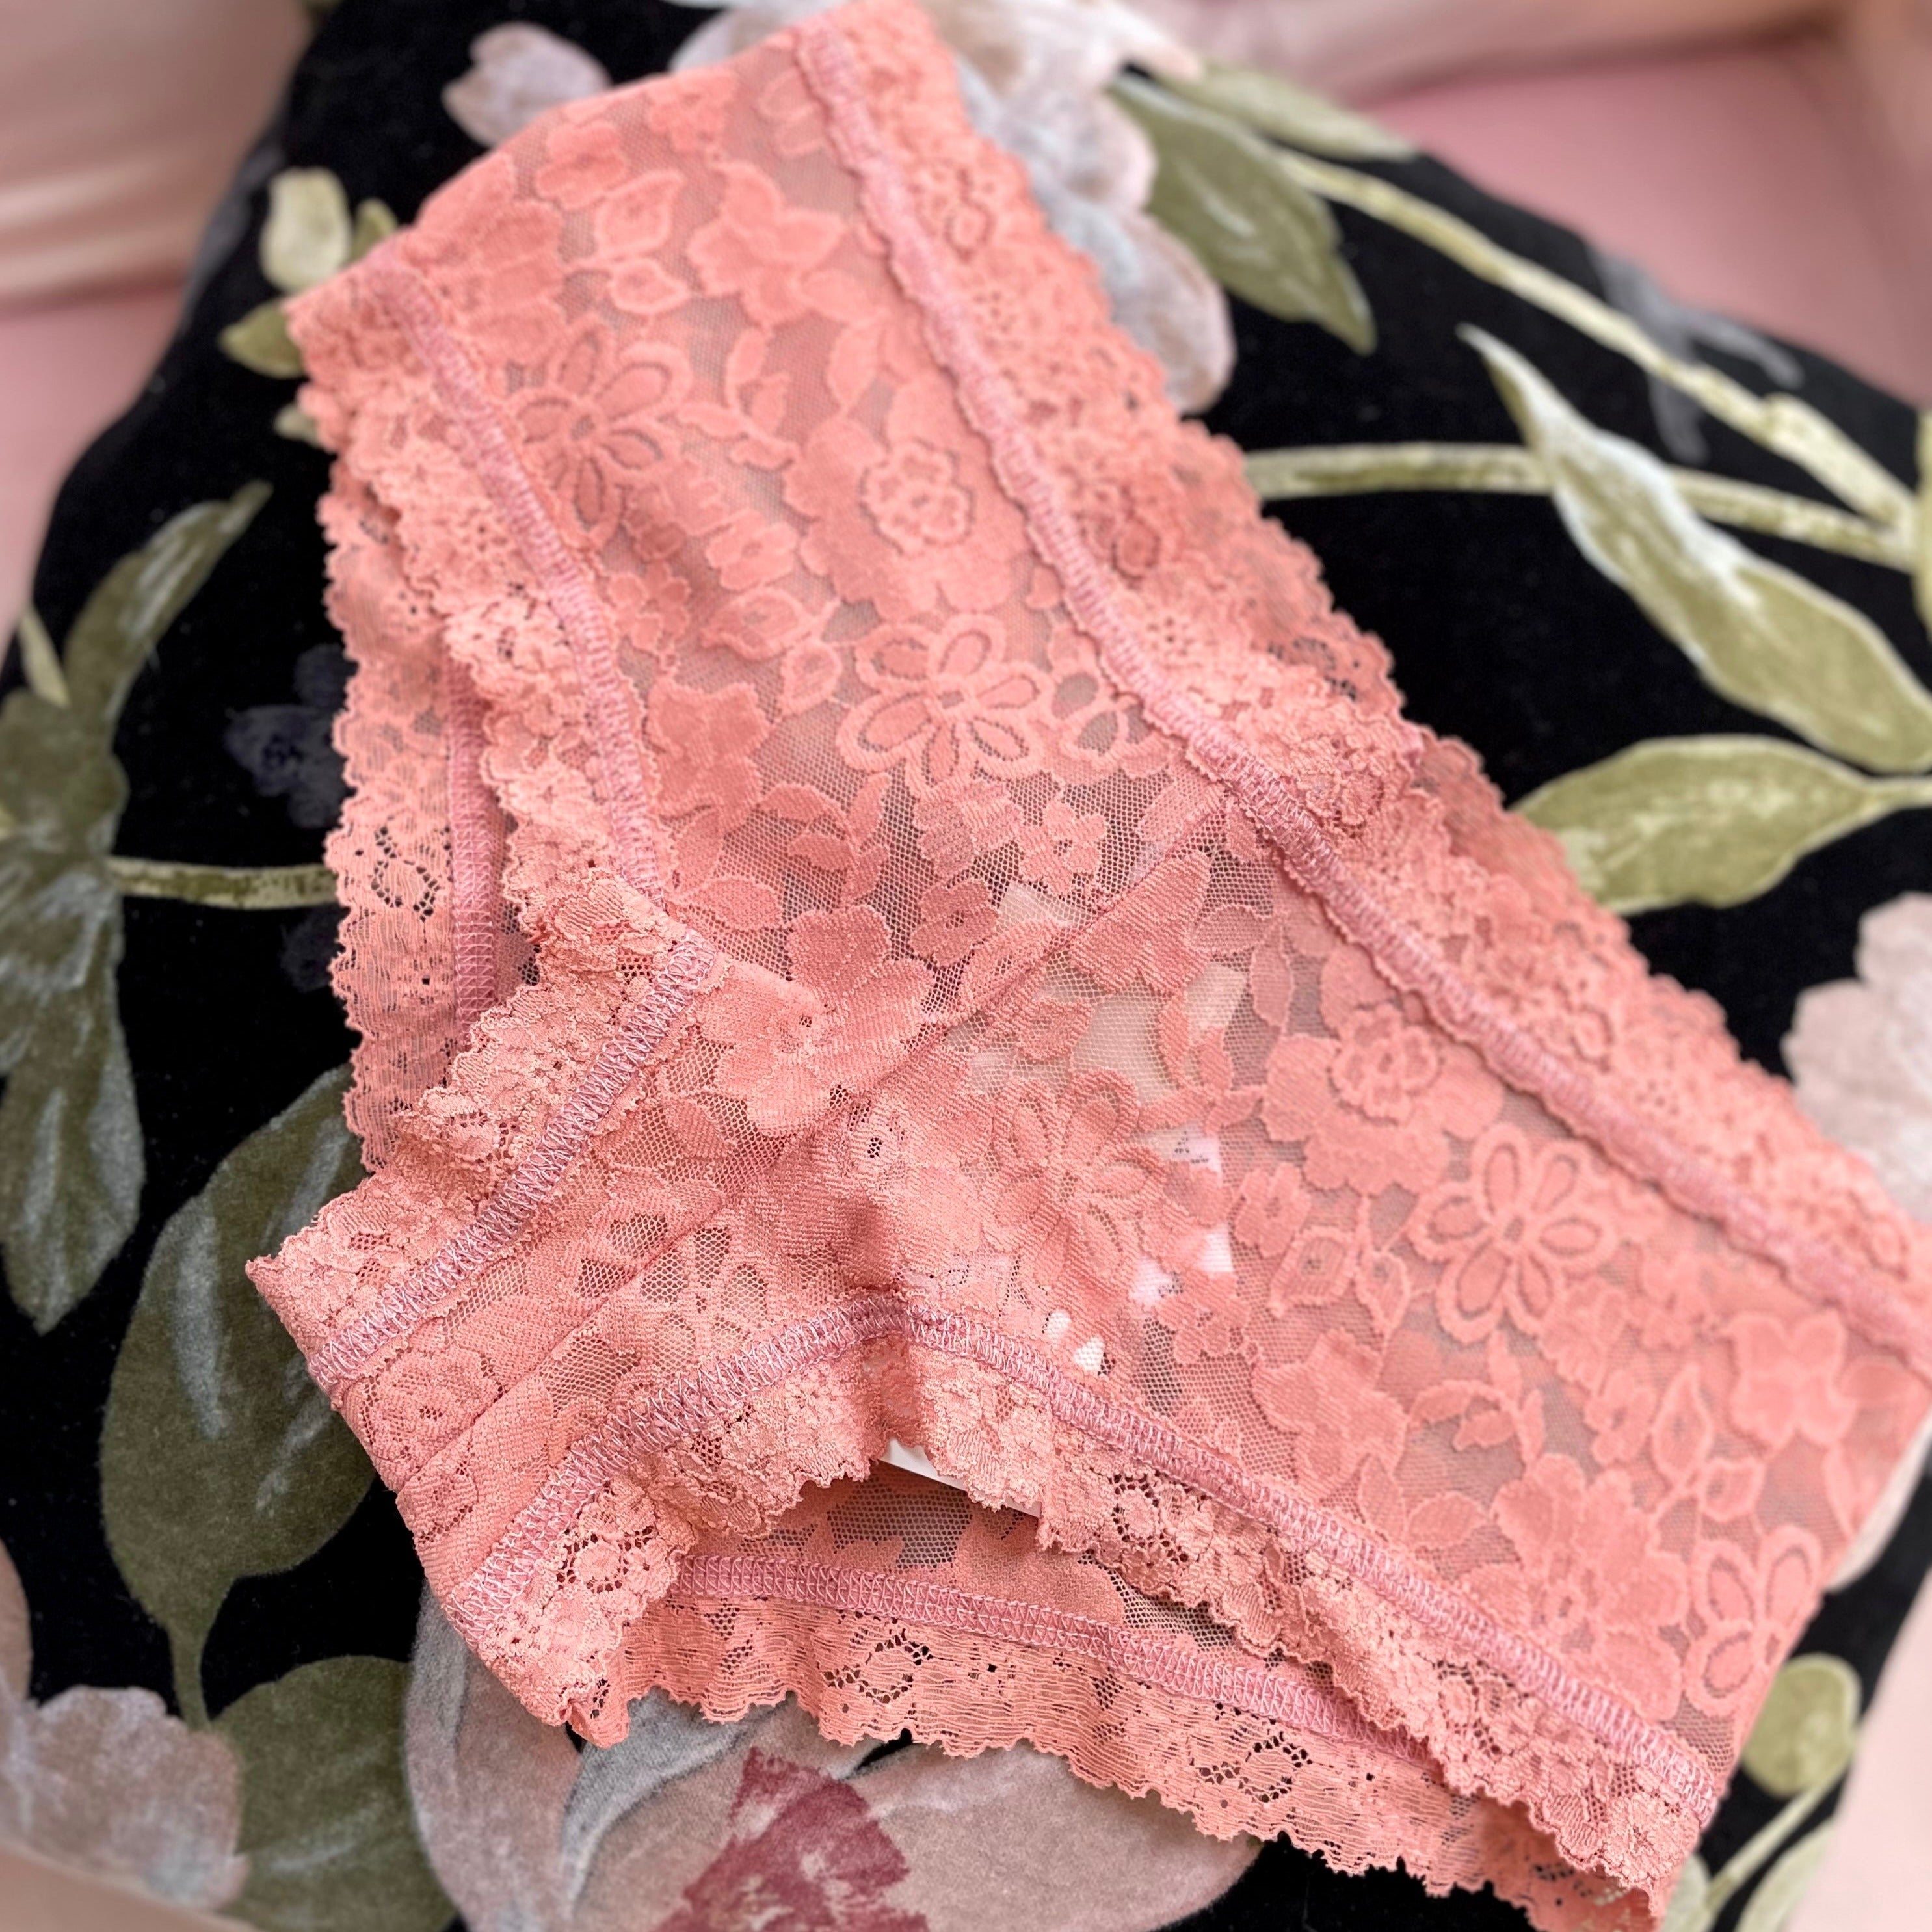 This mid-rise panty is an everyday outfit primer. It covers your bottom in gentle flowers, giving a sumptuous skin feel. The fit diminishes any lines under clothing, providing a smooth appearance.